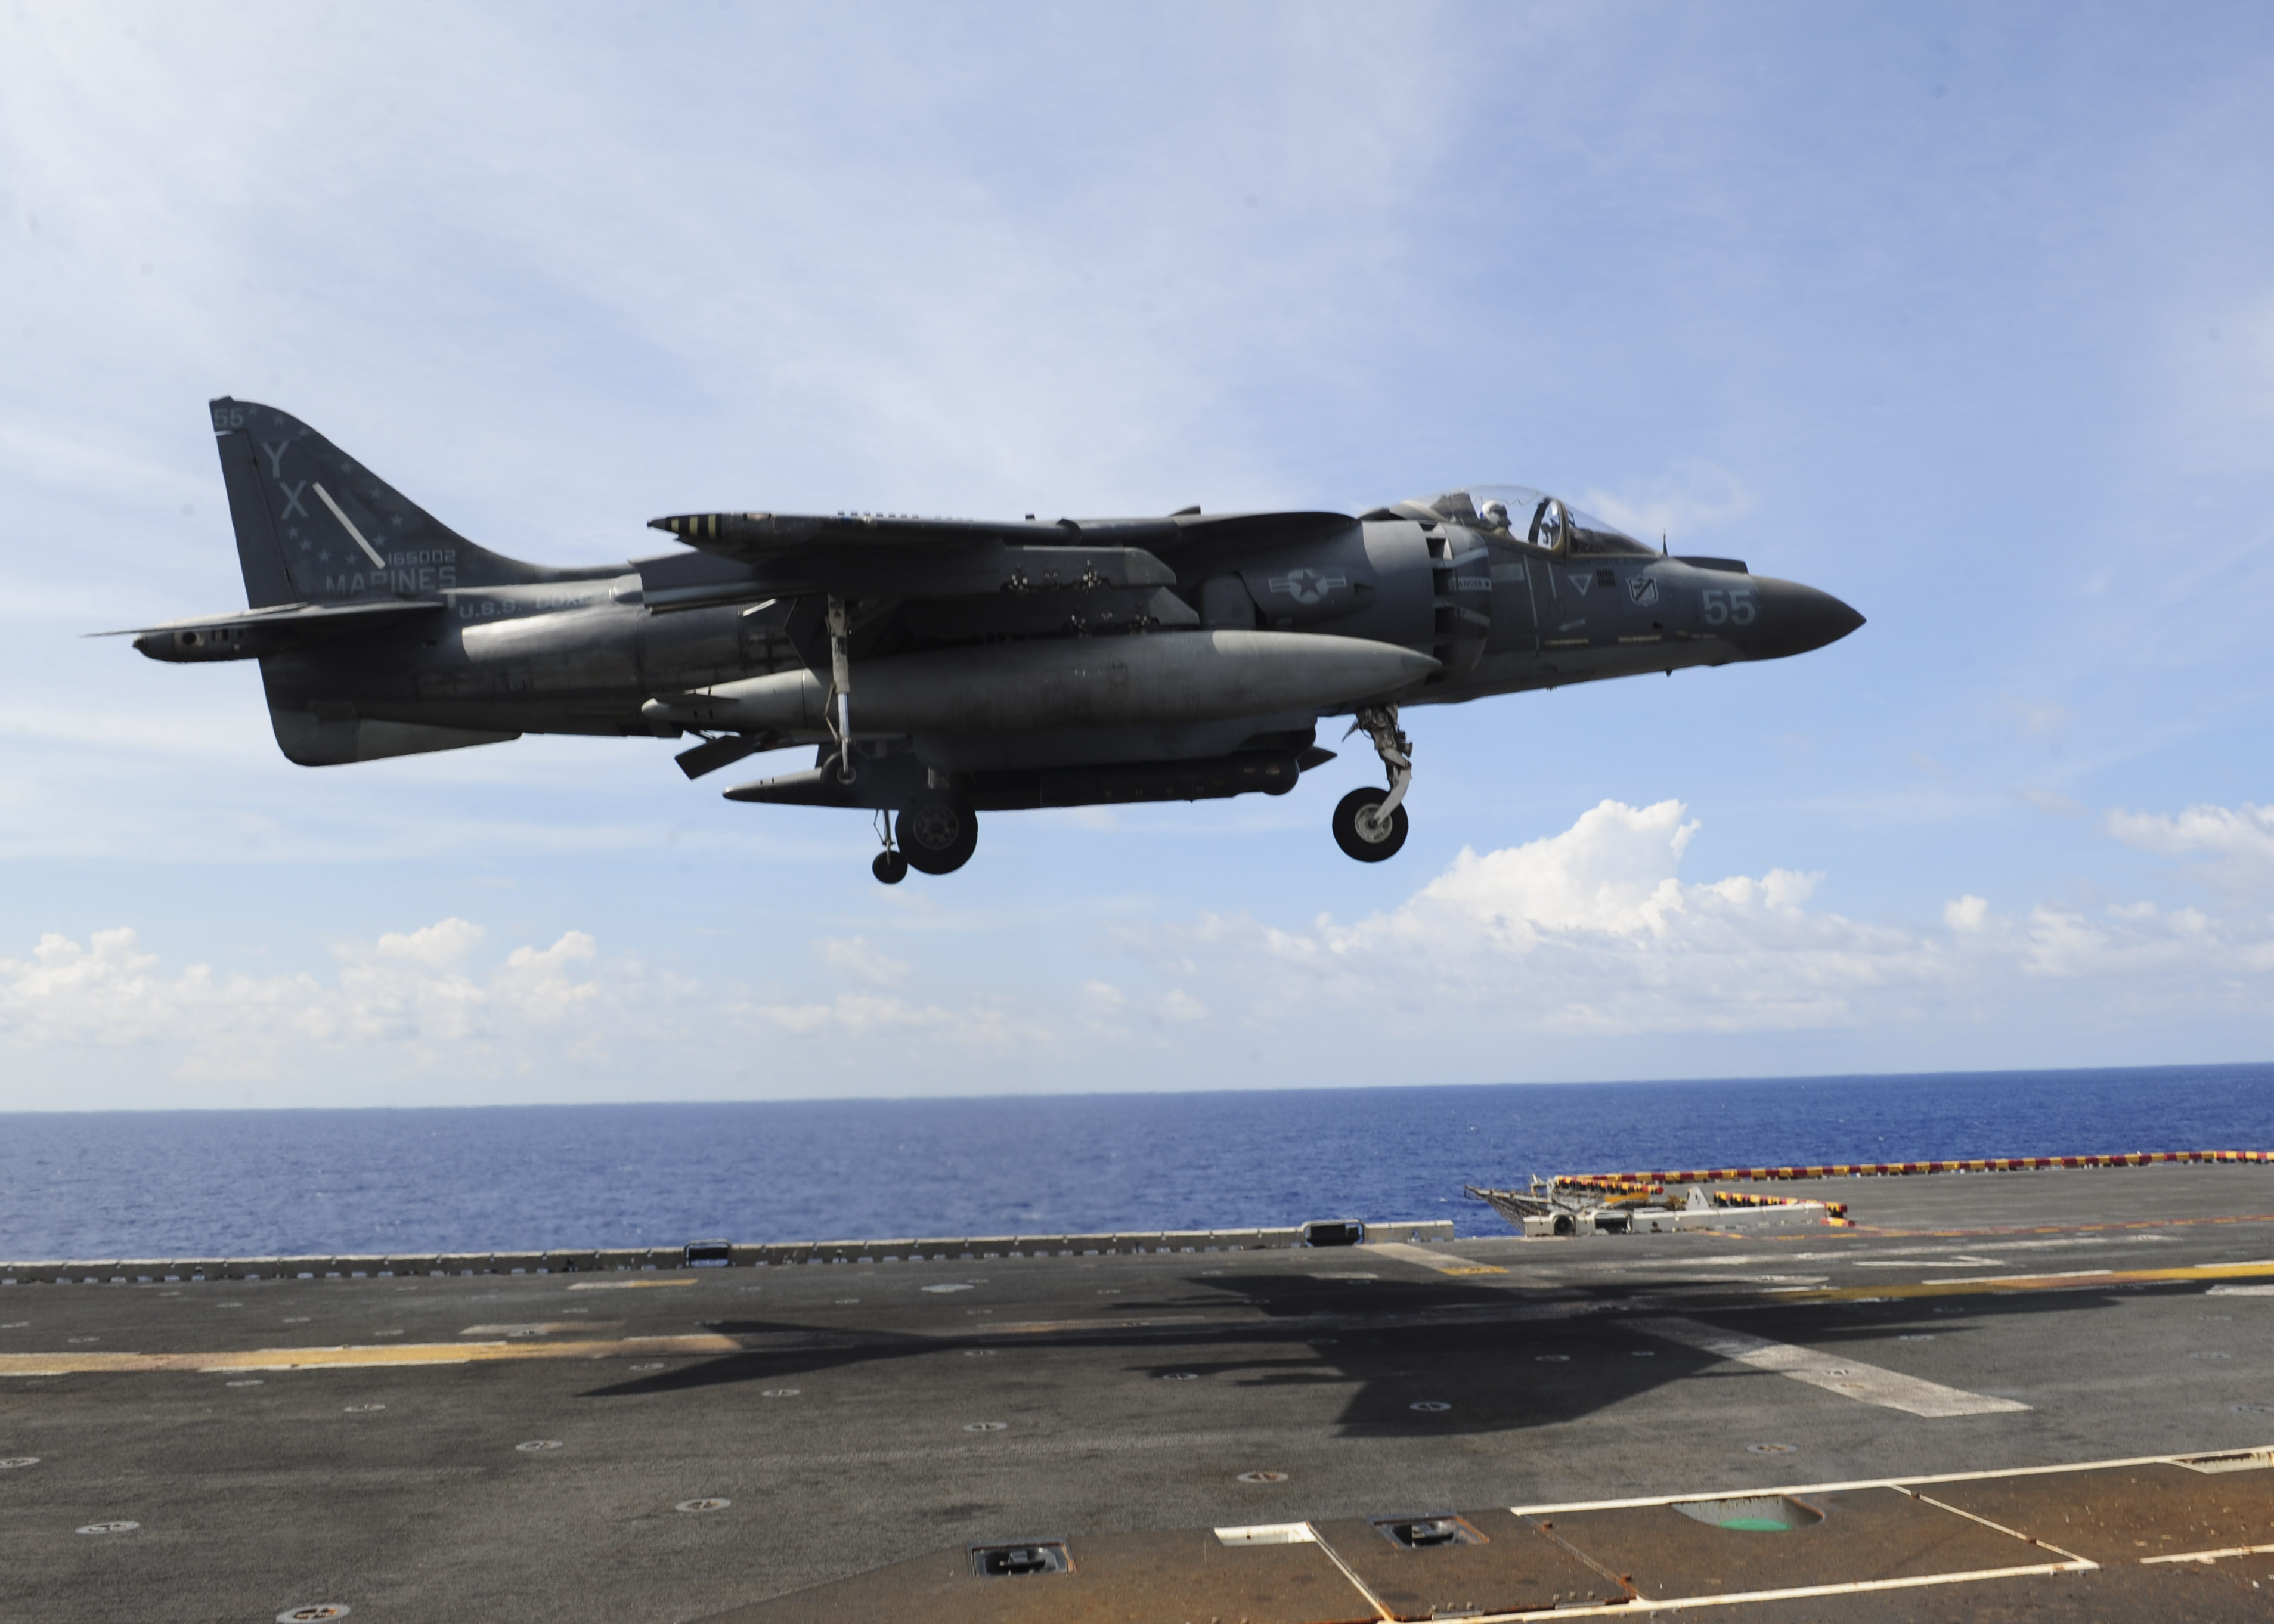 An AV-8B Harrier II, assigned to the 13th Marine Expeditionary Unit (MEU), prepares to land on the flight deck of amphibious assault ship USS boxer (LHD-4). US Navy Photo